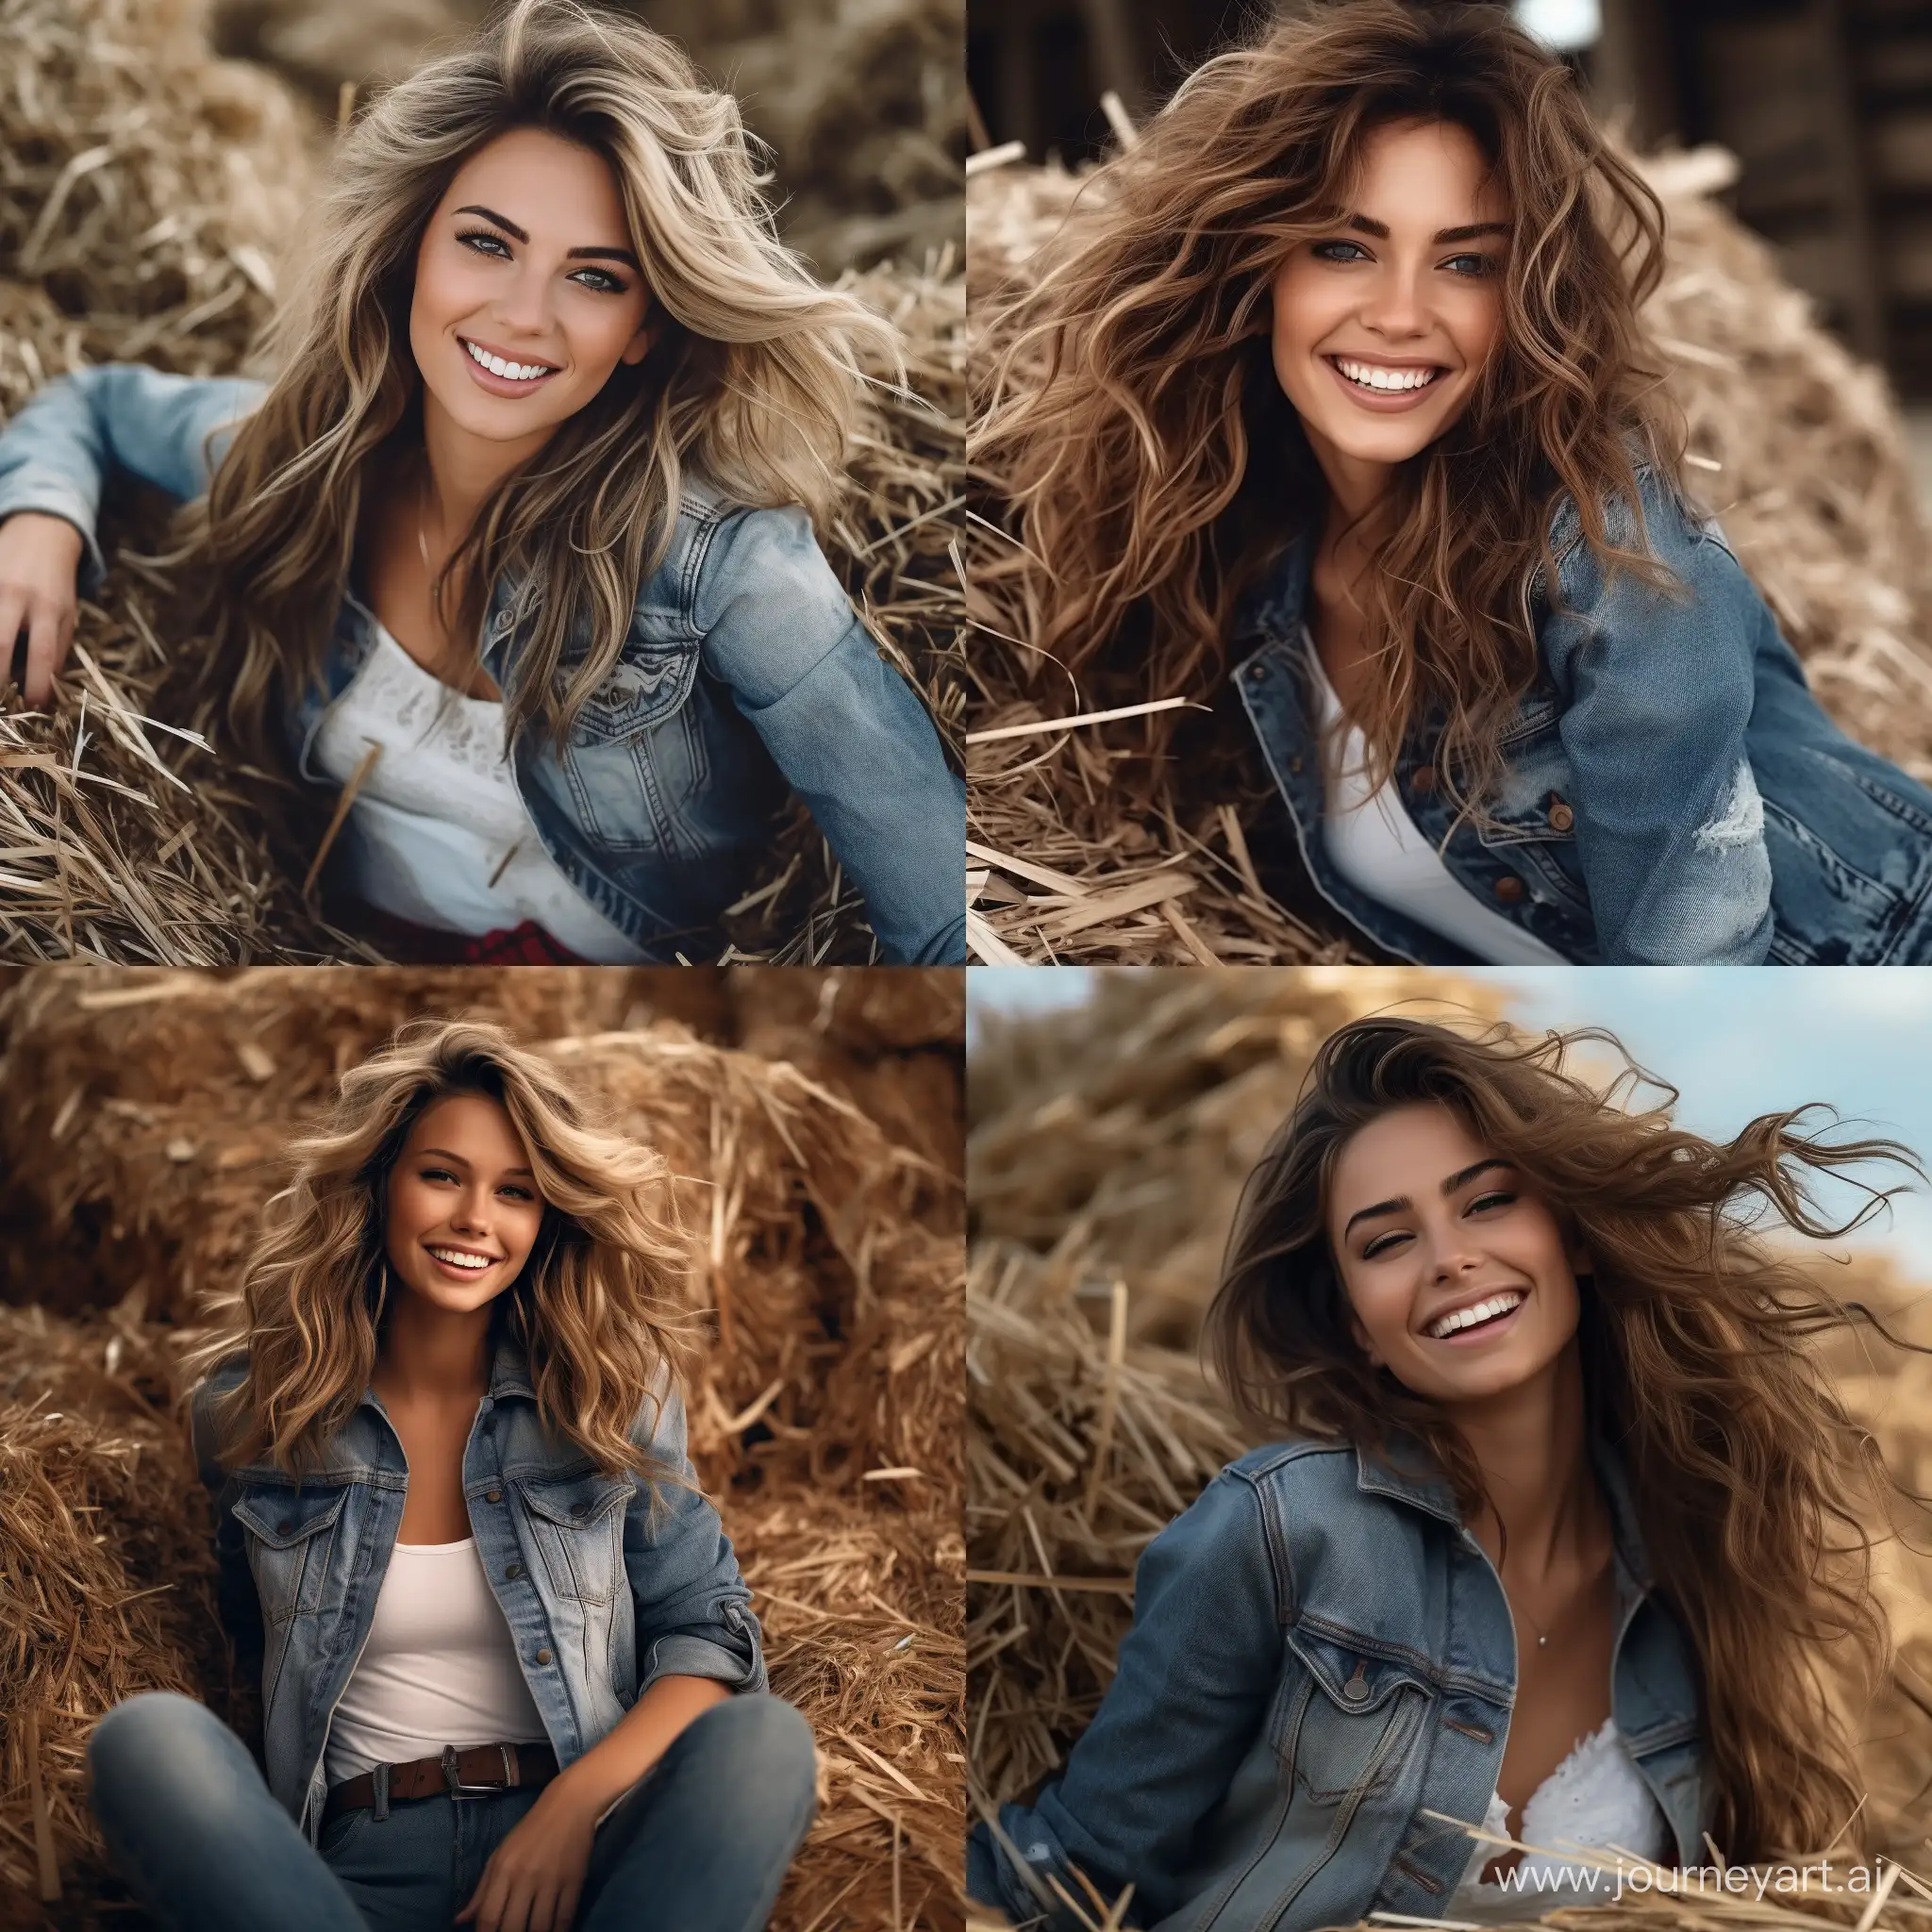 Stylish-Woman-on-Haystack-in-Westerninspired-Outfit-Radiant-Smile-and-Effortless-Elegance